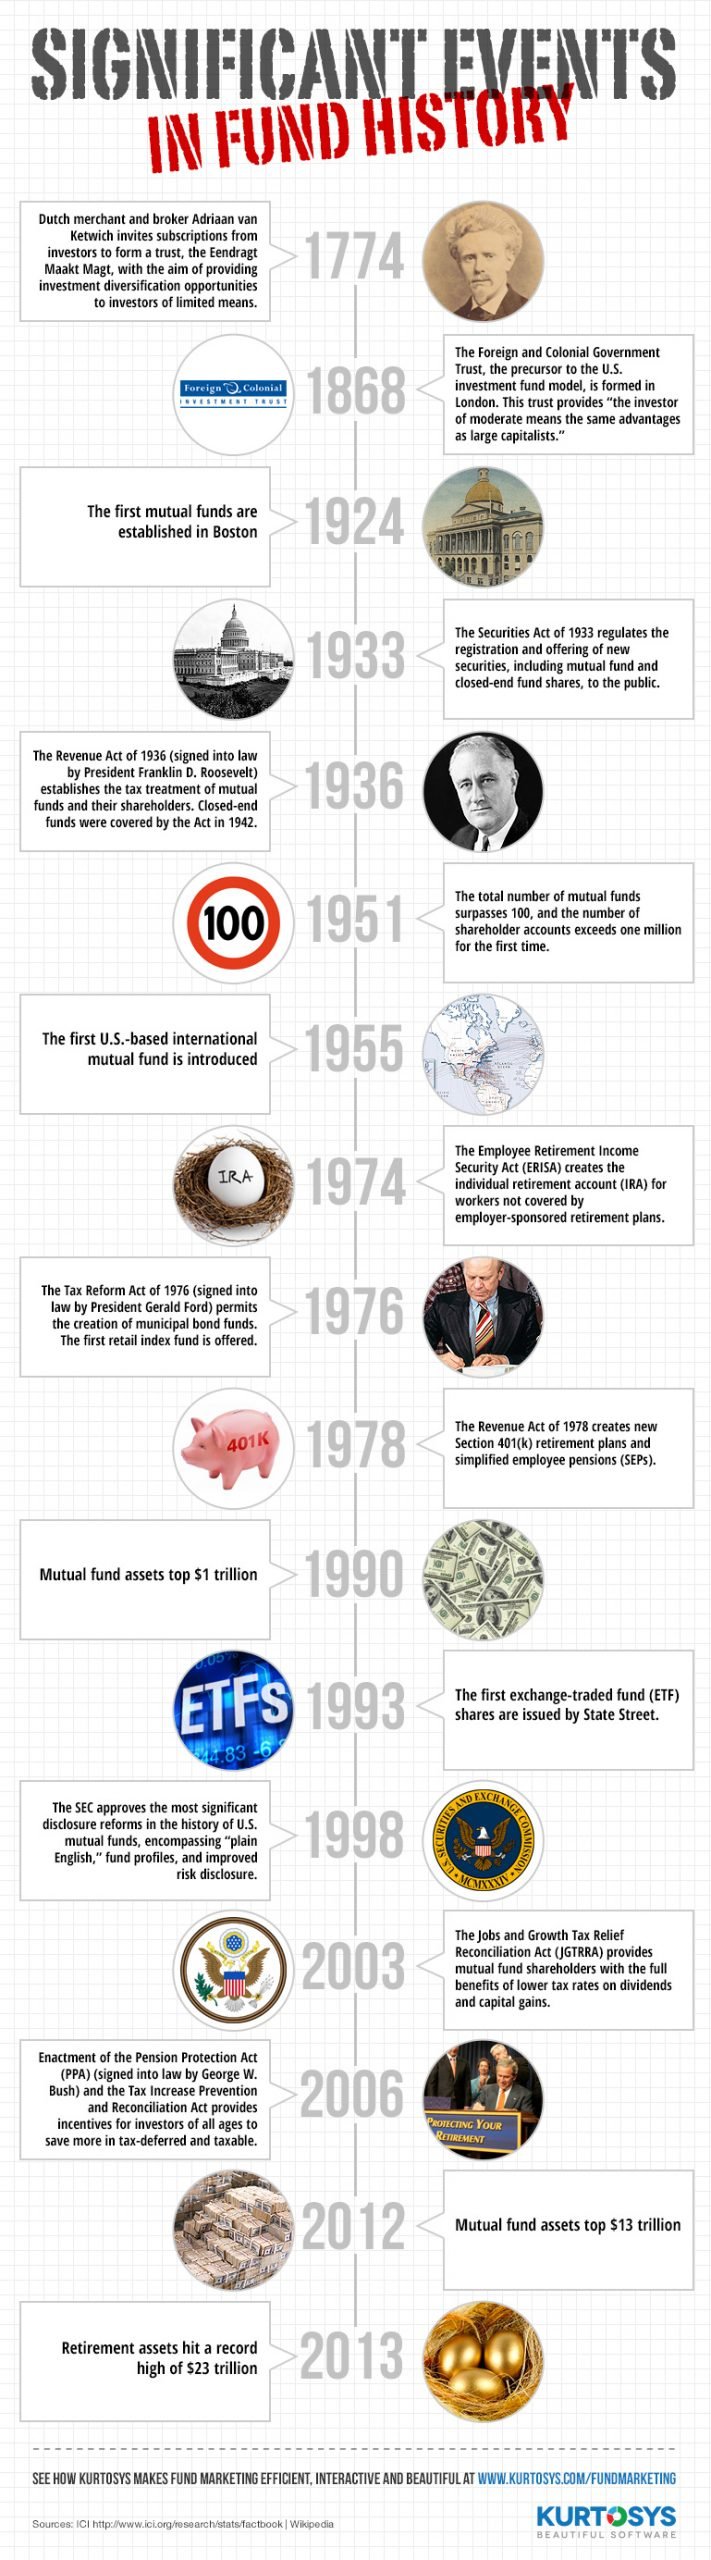 Significant Events in Fund History (INFOGRAPHIC) 1